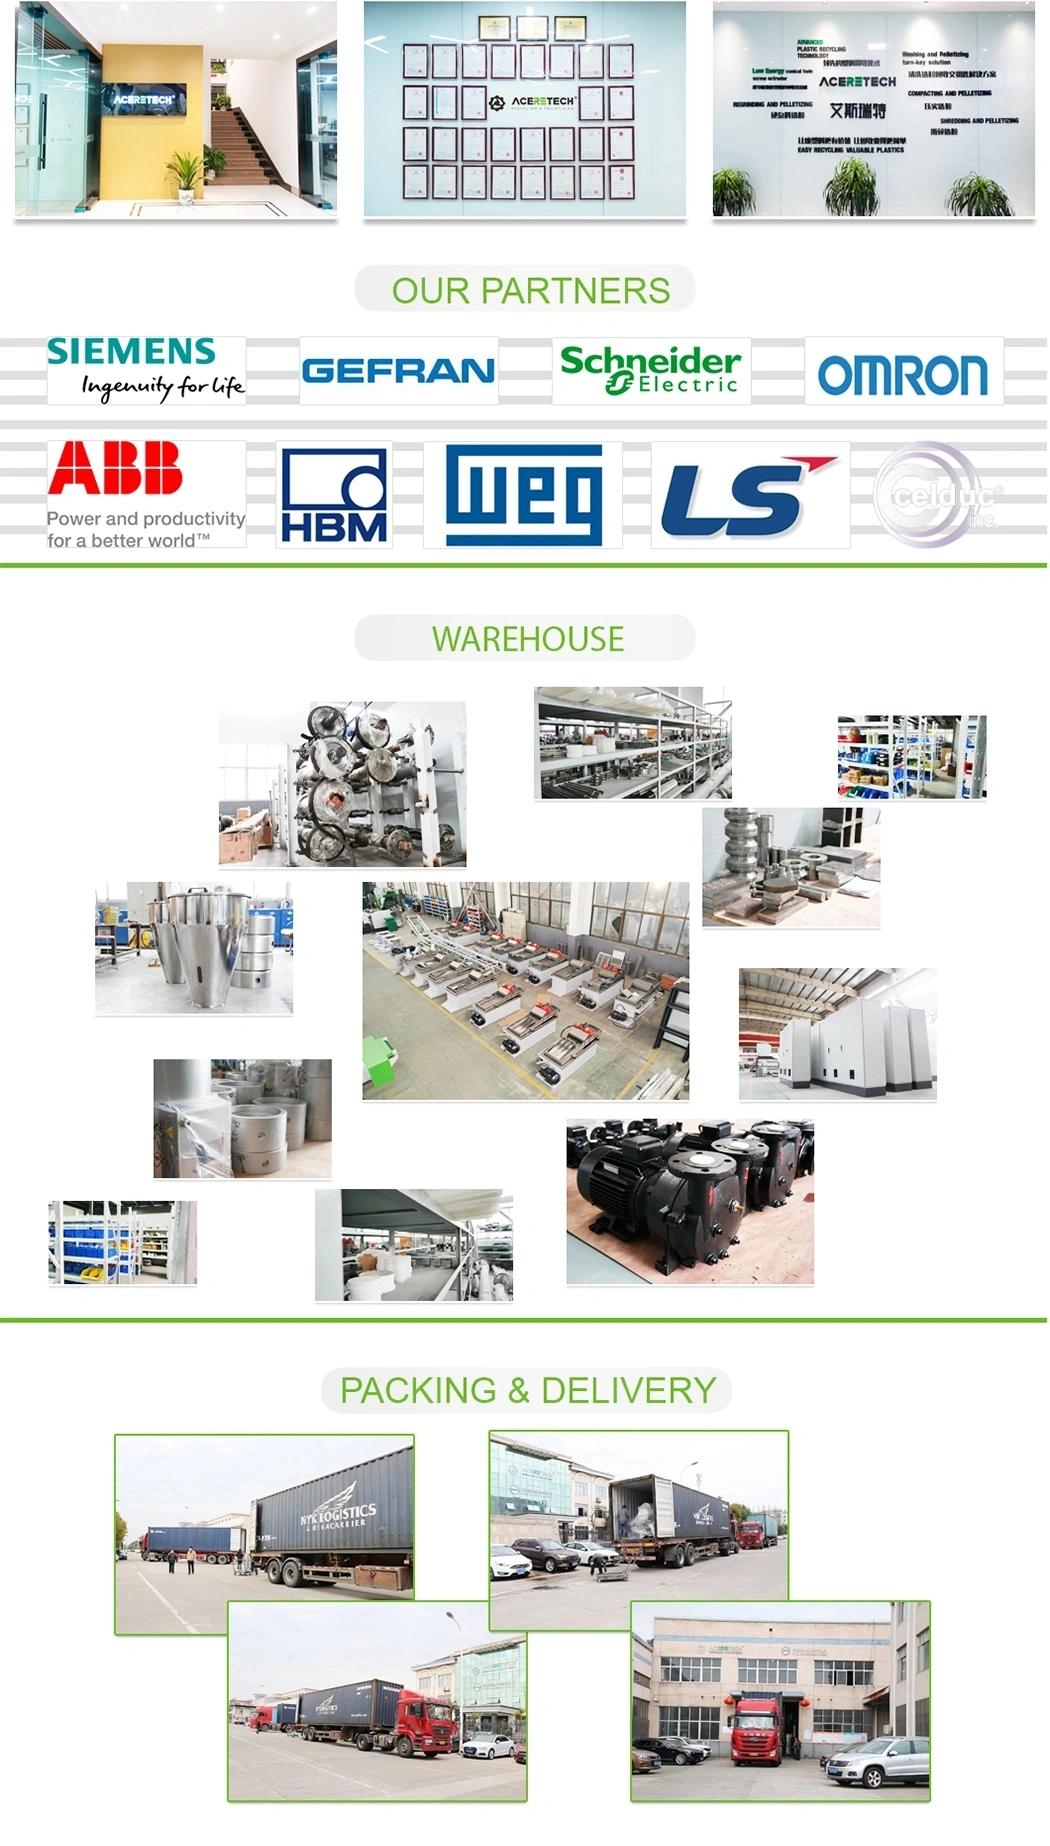 Fully Automatic High Speed Plastic Washing and Pet Recycling Line